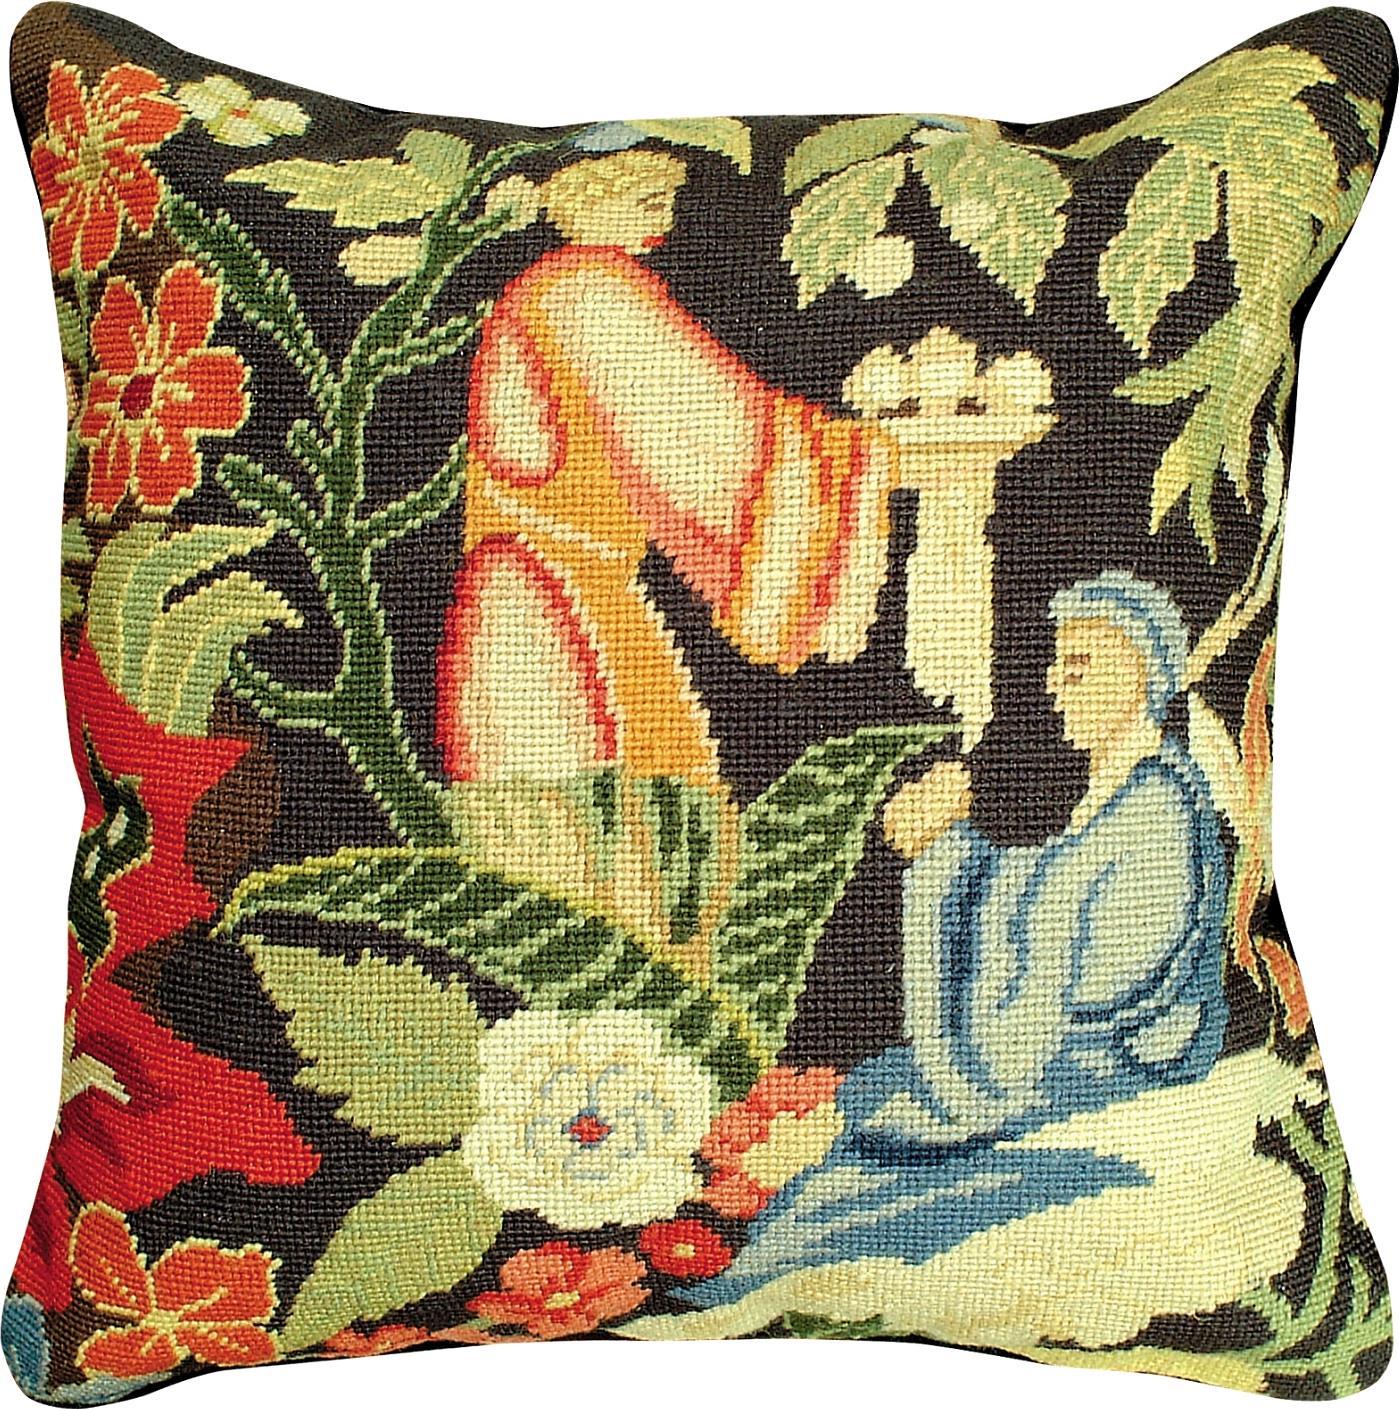 Throw Pillow Needlepoint St Cyr 18x18 Red Gray Green Gold Black Blue Yellow-Image 1